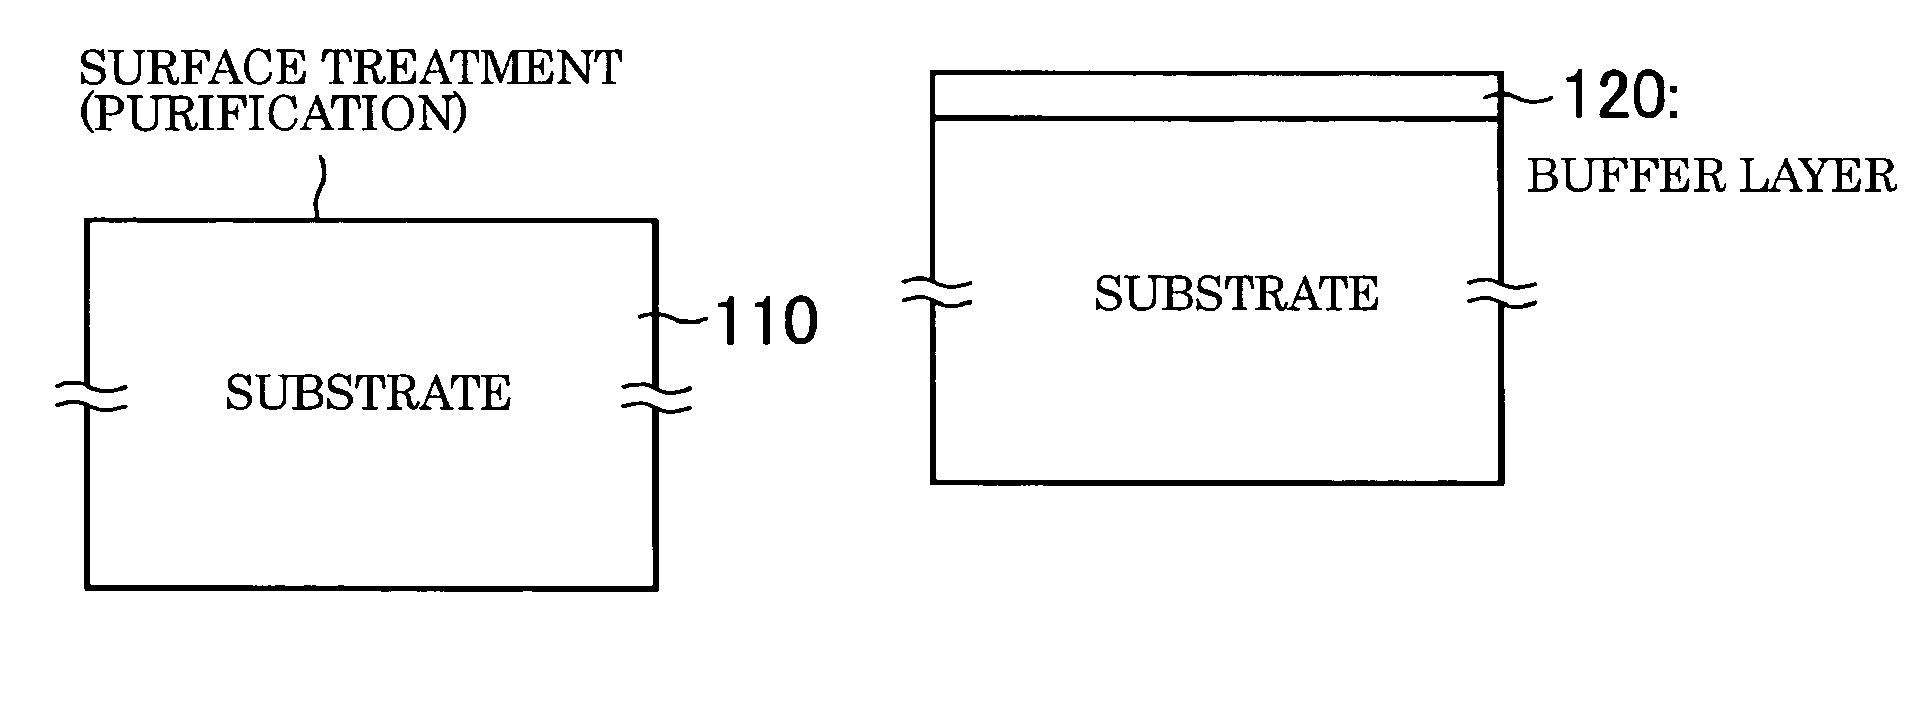 Process for producing gan substrate